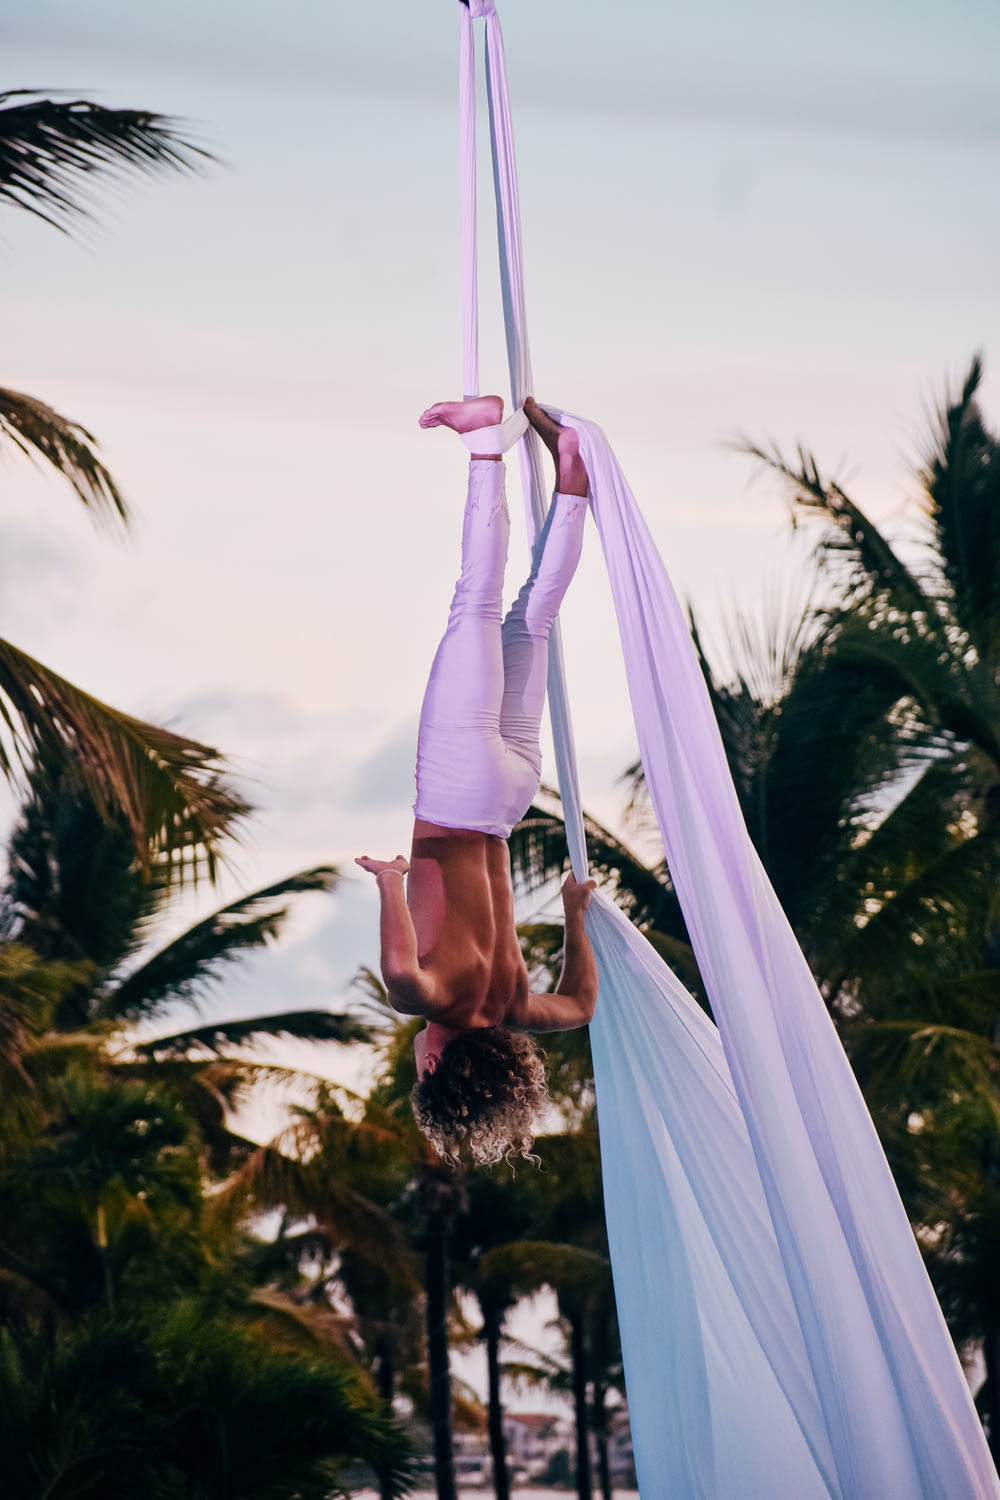 a woman doing aerial acrobatic tricks on a pole